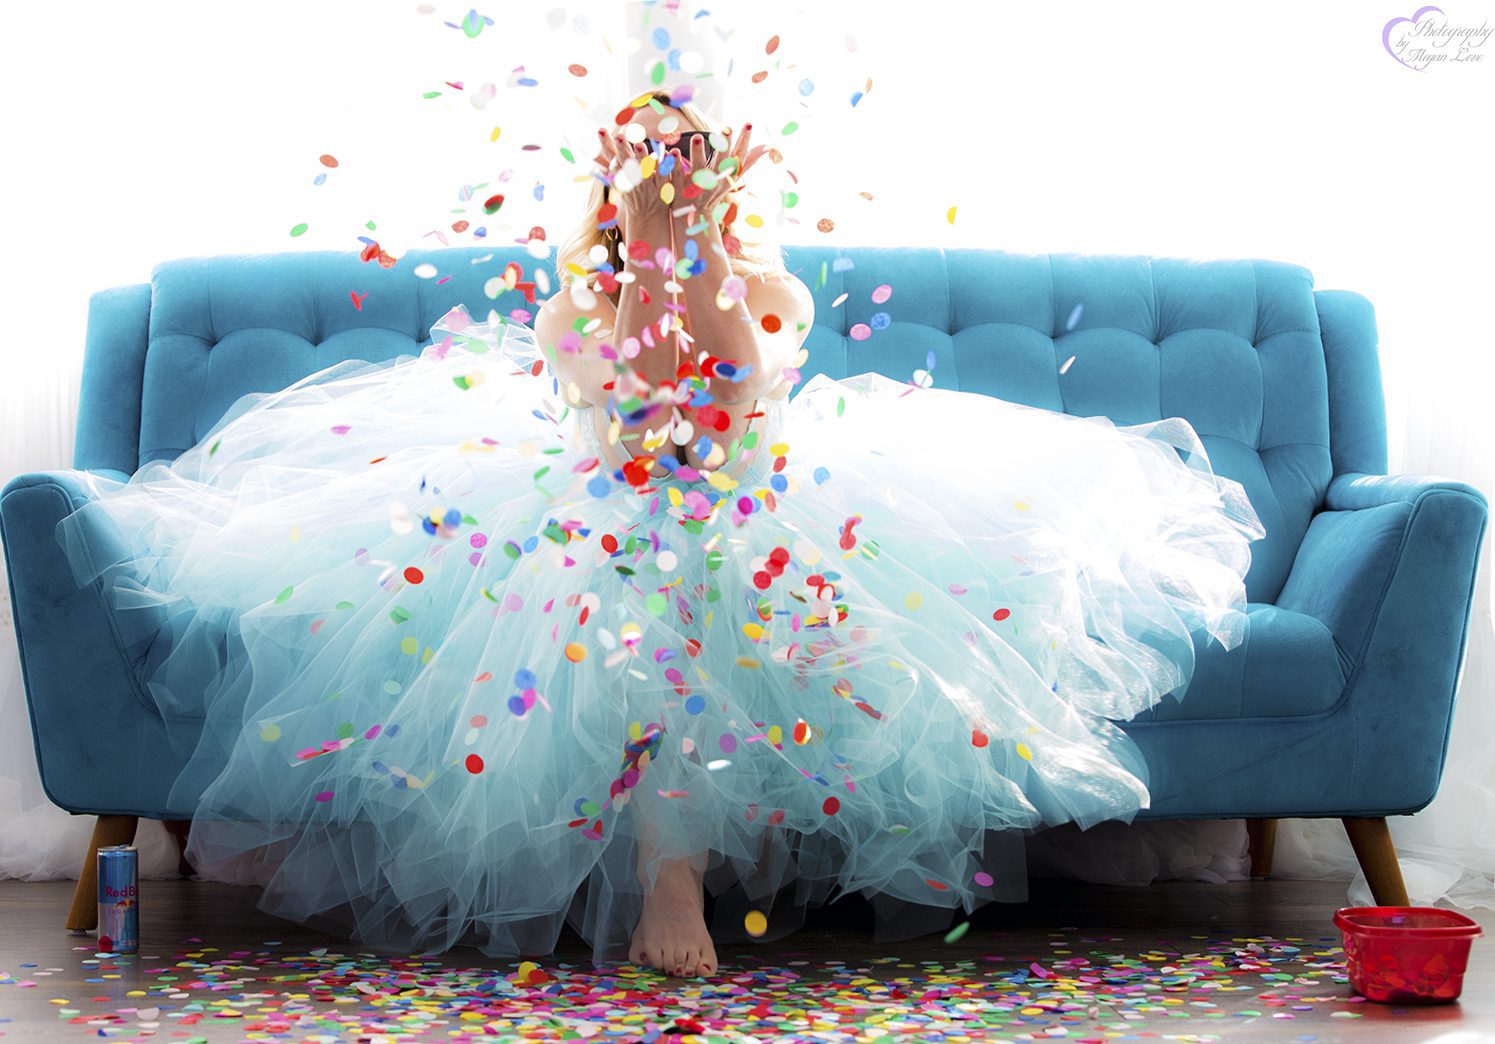 Megan Love sitting on blue couch wearing a tutu and throwing confetti